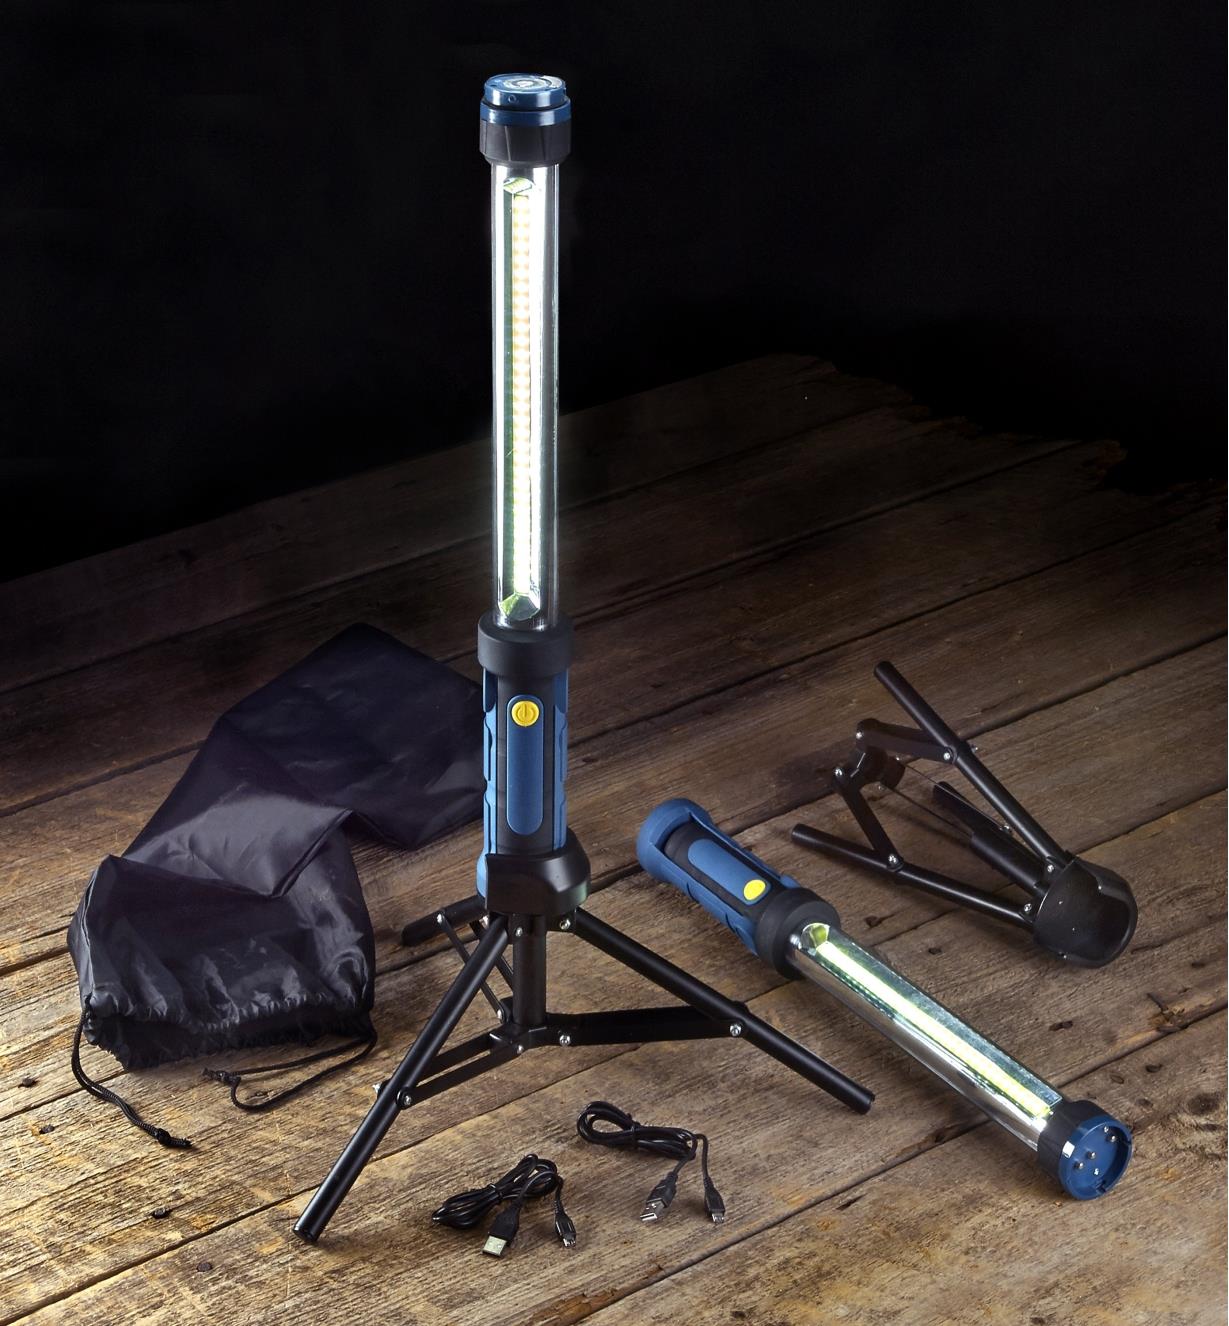 The LED tube lights set arranged on a floor, with one of the LED fixtures mounted on a tripod